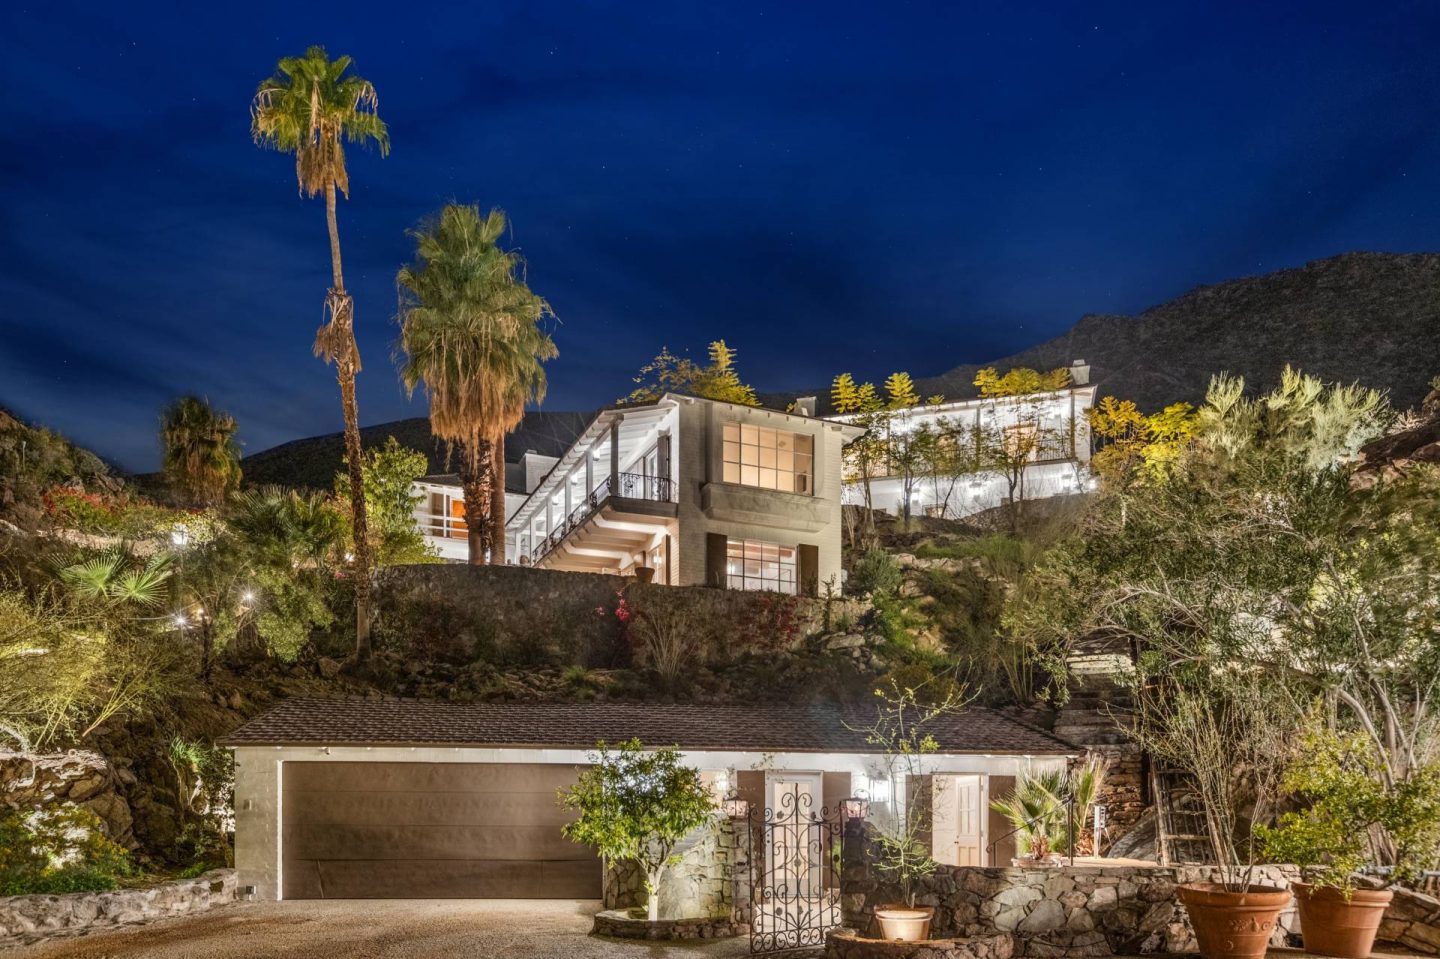 Tour Suzanne Somer’s decadent Palm Springs compound complete with magical views of the desert